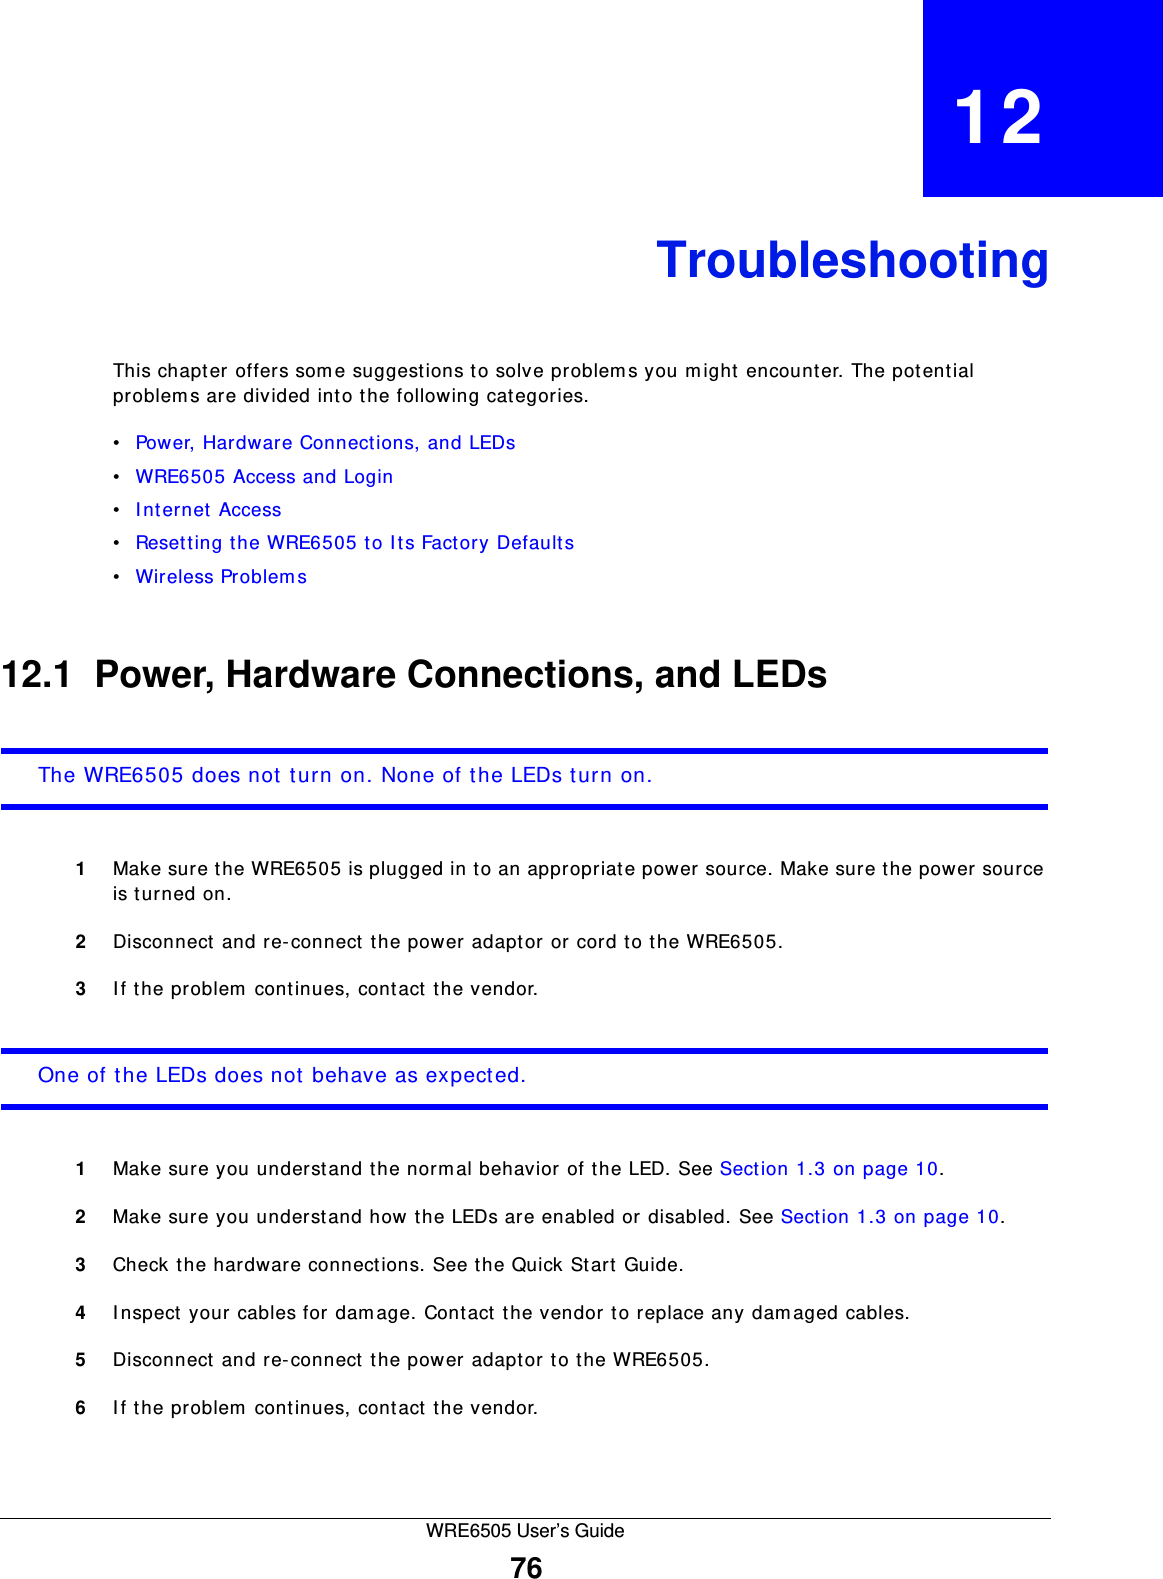 WRE6505 User’s Guide76CHAPTER   12TroubleshootingThis chapter offers some suggestions to solve problems you m ight encounter. The potential problems are divided into the following categories. •Power, Hardware Connections, and LEDs•WRE6505 Access and Login•Internet Access•Resetting the WRE6505 to I ts Factory Defaults•Wireless Problem s12.1  Power, Hardware Connections, and LEDsThe WRE6505 does not turn on. None of the LEDs turn on.1Make sure the WRE6505 is plugged in to an appropriate power source. Make sure the power source is turned on.2Disconnect and re- connect the power adaptor or cord to the WRE6505.3If the problem continues, contact  the vendor.One of the LEDs does not behave as expected.1Make sure you understand the normal behavior of the LED. See Section 1.3 on page 10.2Make sure you understand how the LEDs are enabled or disabled. See Section 1.3 on page 10.3Check the hardware connections. See the Quick Start Guide. 4Inspect your cables for damage. Contact the vendor to replace any dam aged cables.5Disconnect and re- connect the power adaptor to the WRE6505. 6If the problem continues, contact  the vendor.